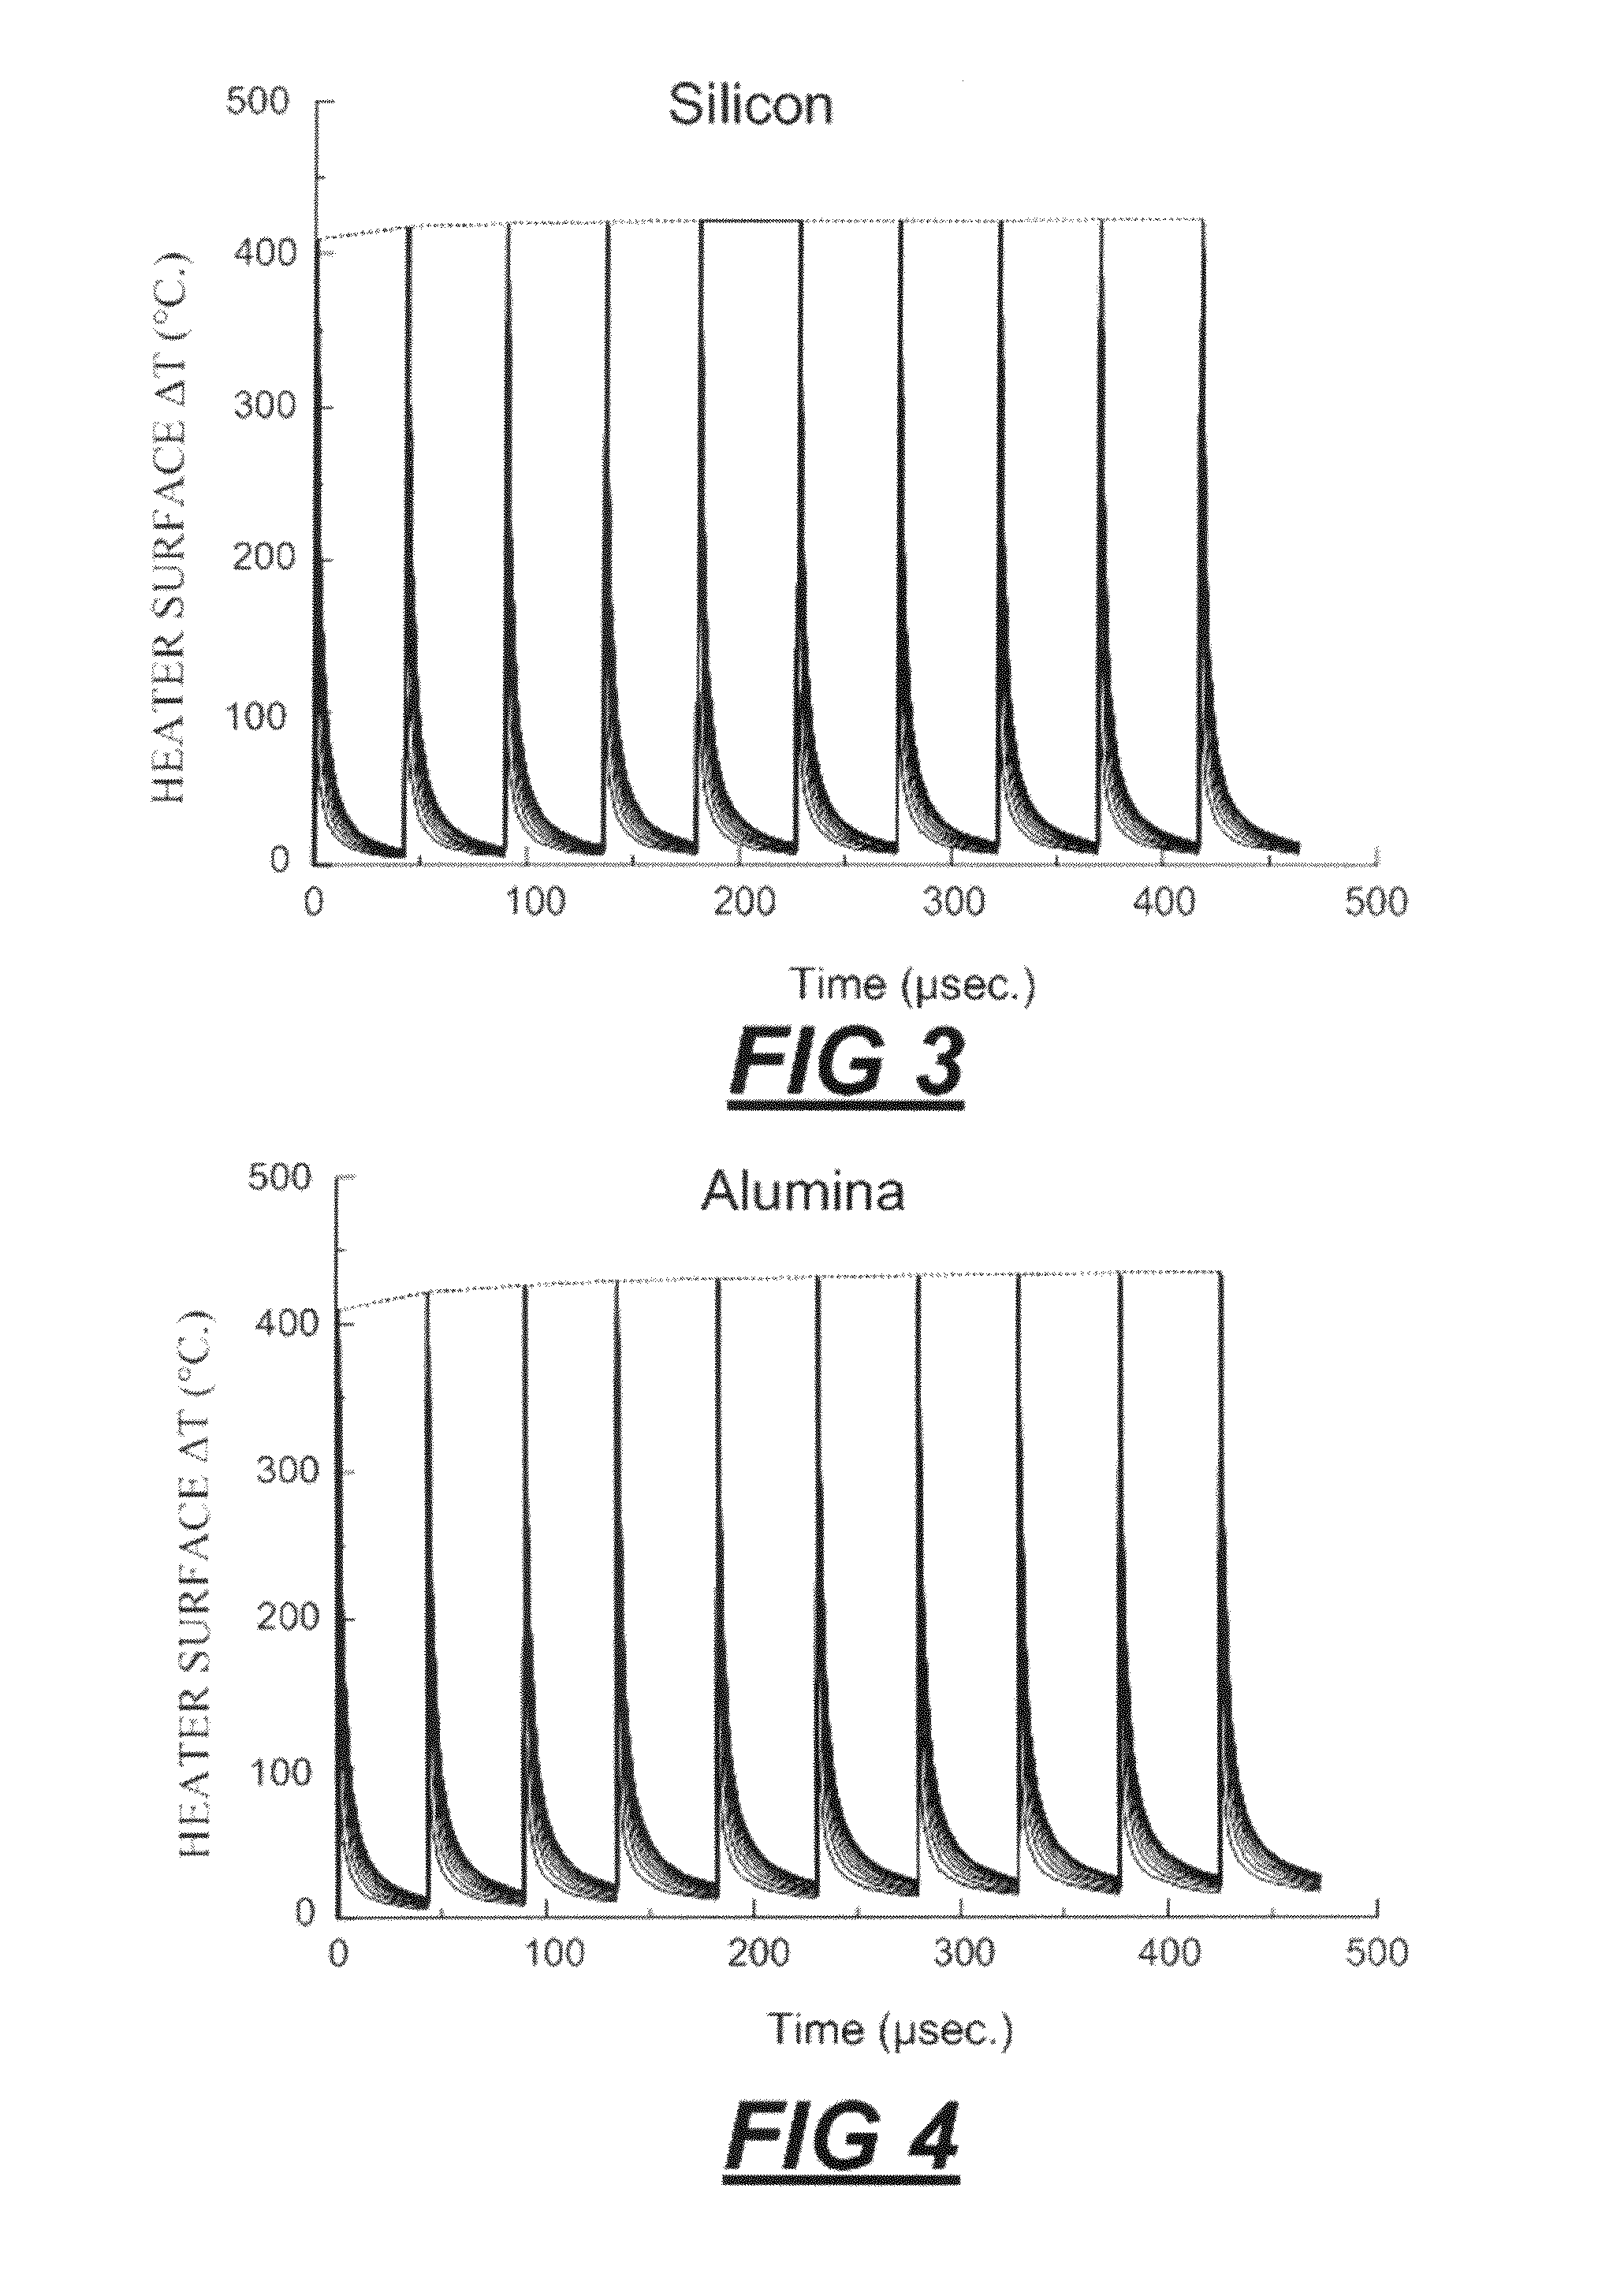 Method for Improving Thermal Conductivity in Micro-Fluid Ejection Heads